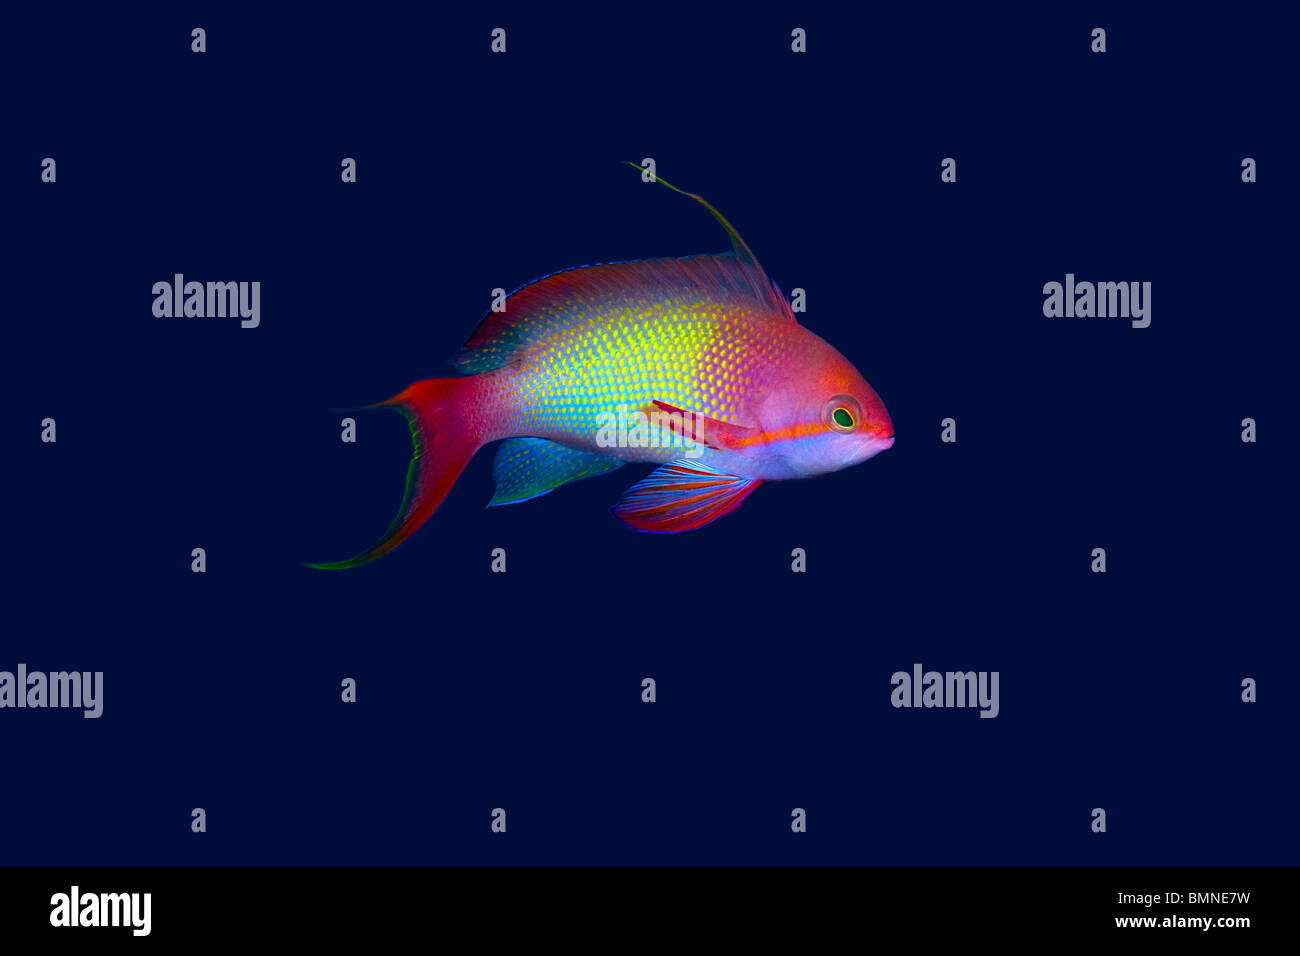 Small colorful tropical fish on blue background Stock Photo - Alamy